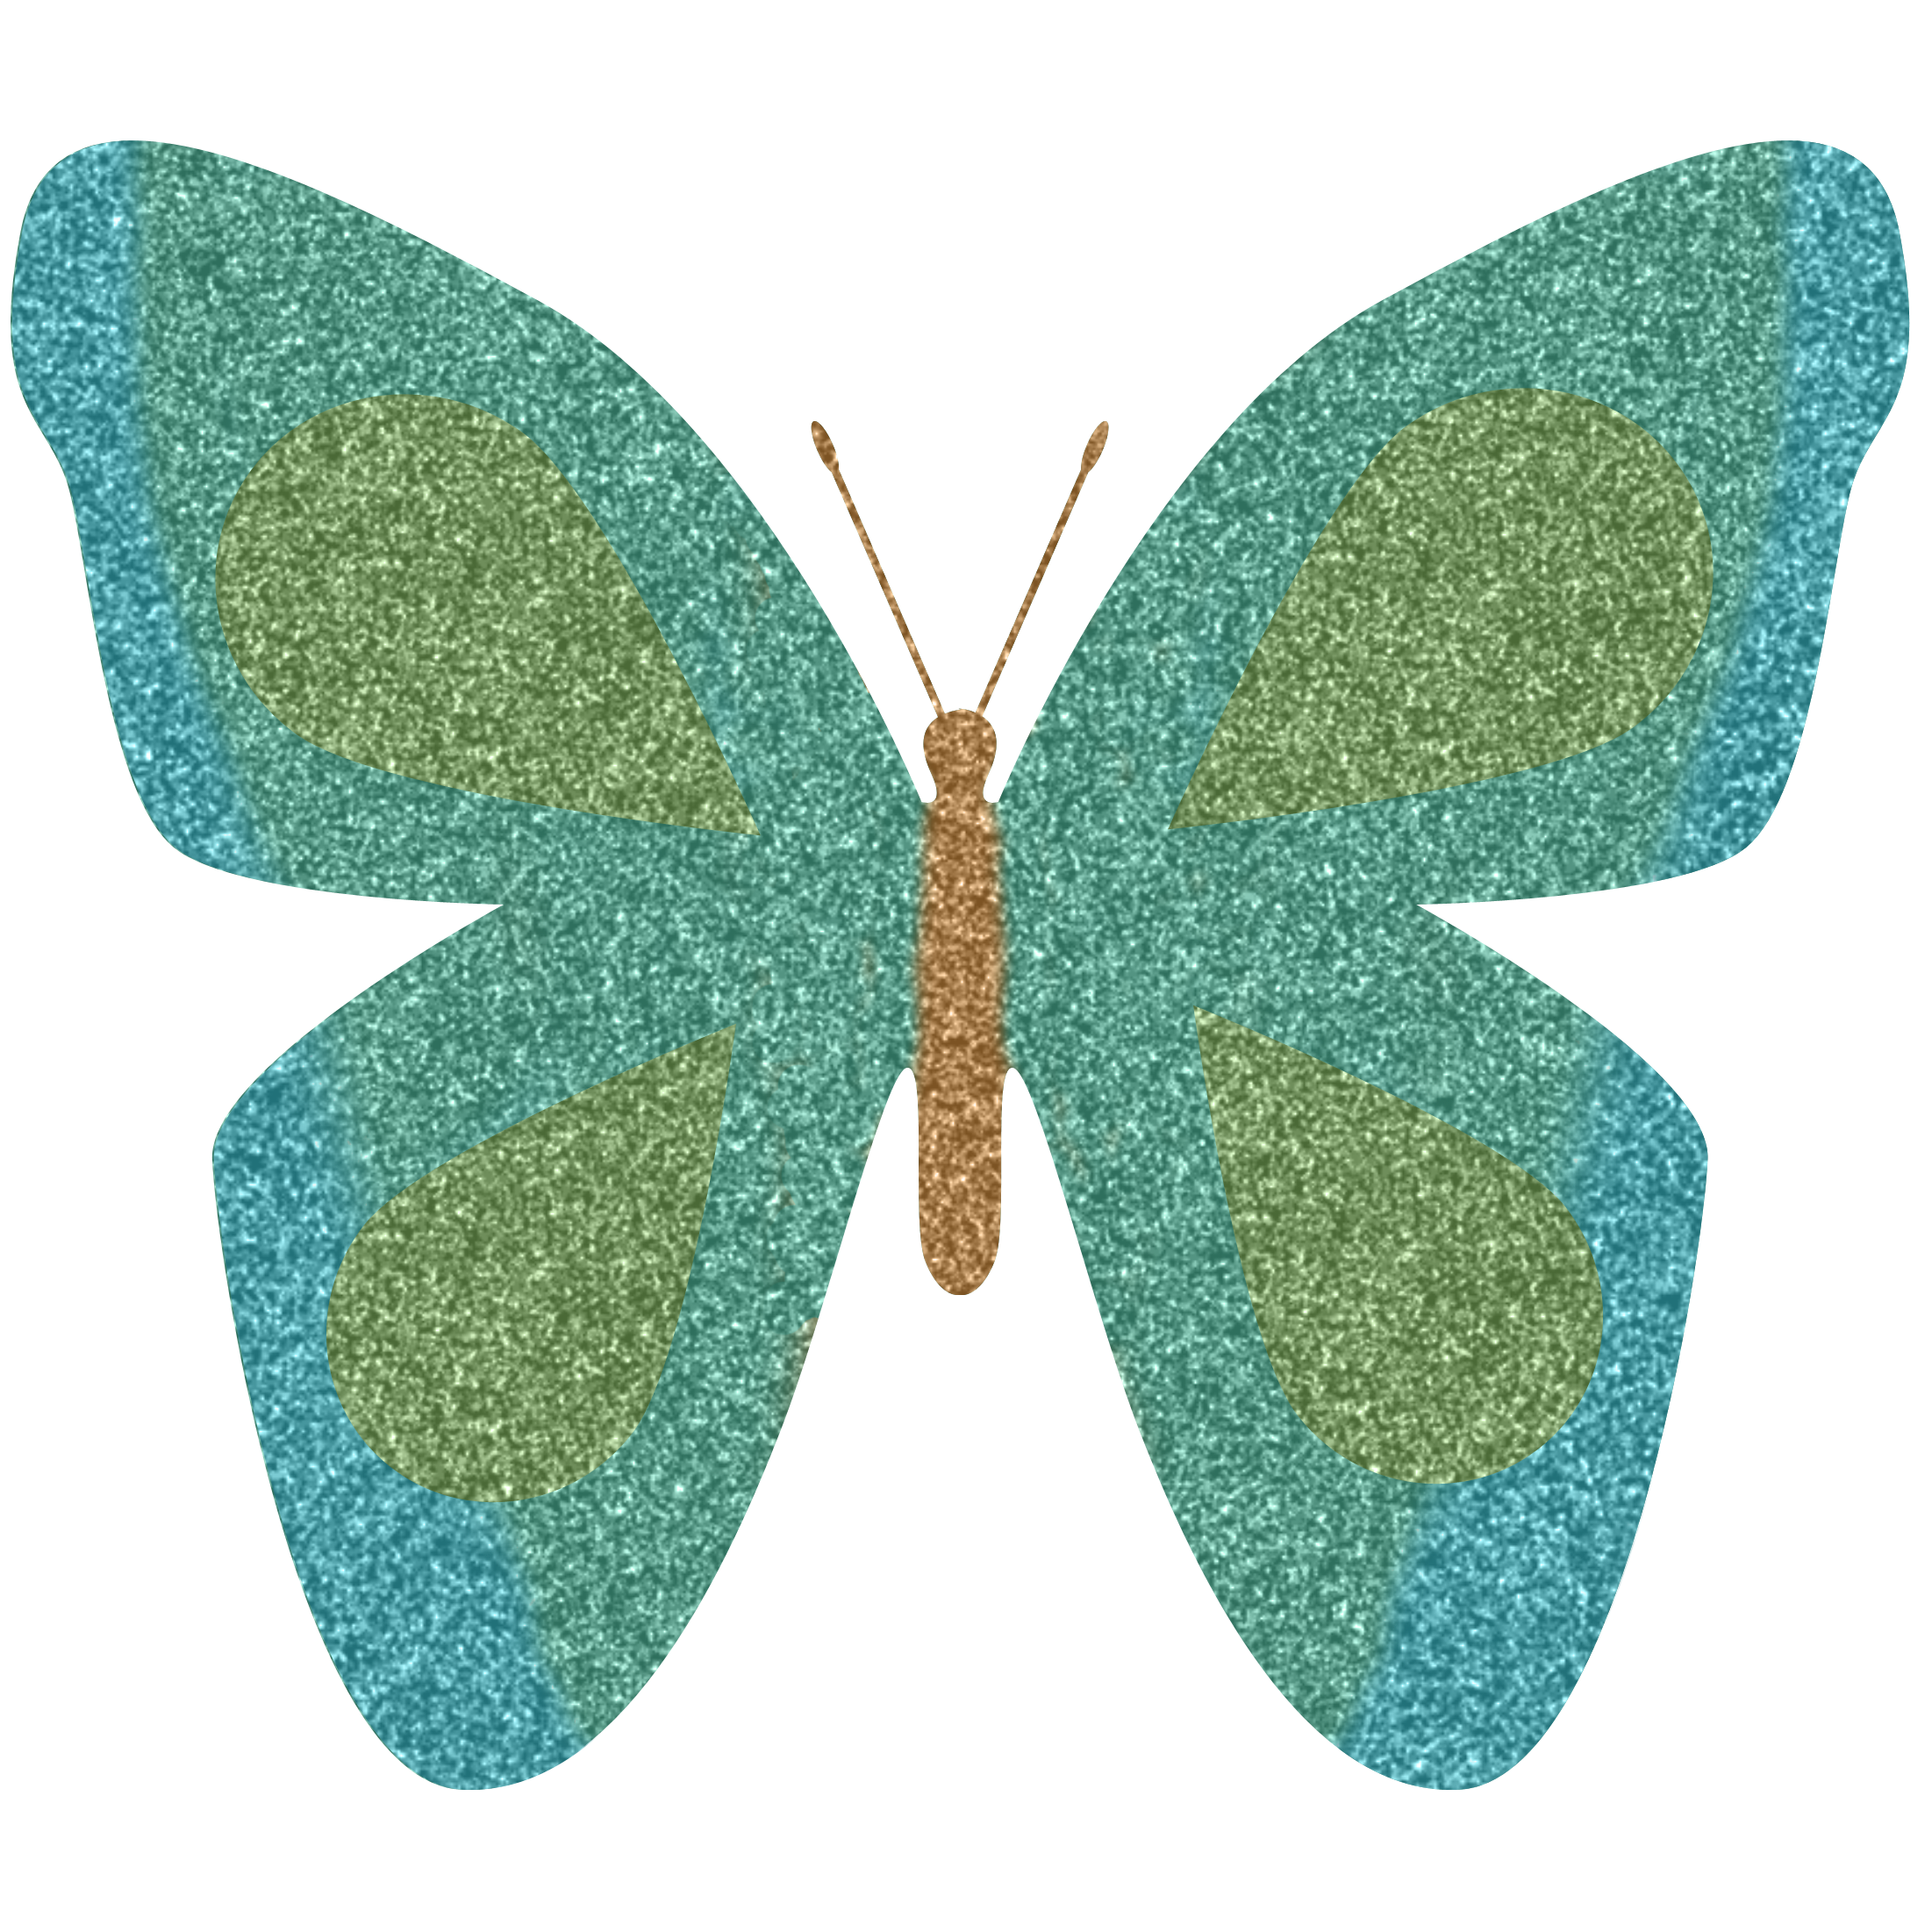 Free Butterfly Pictures Clip Art - Clipart library